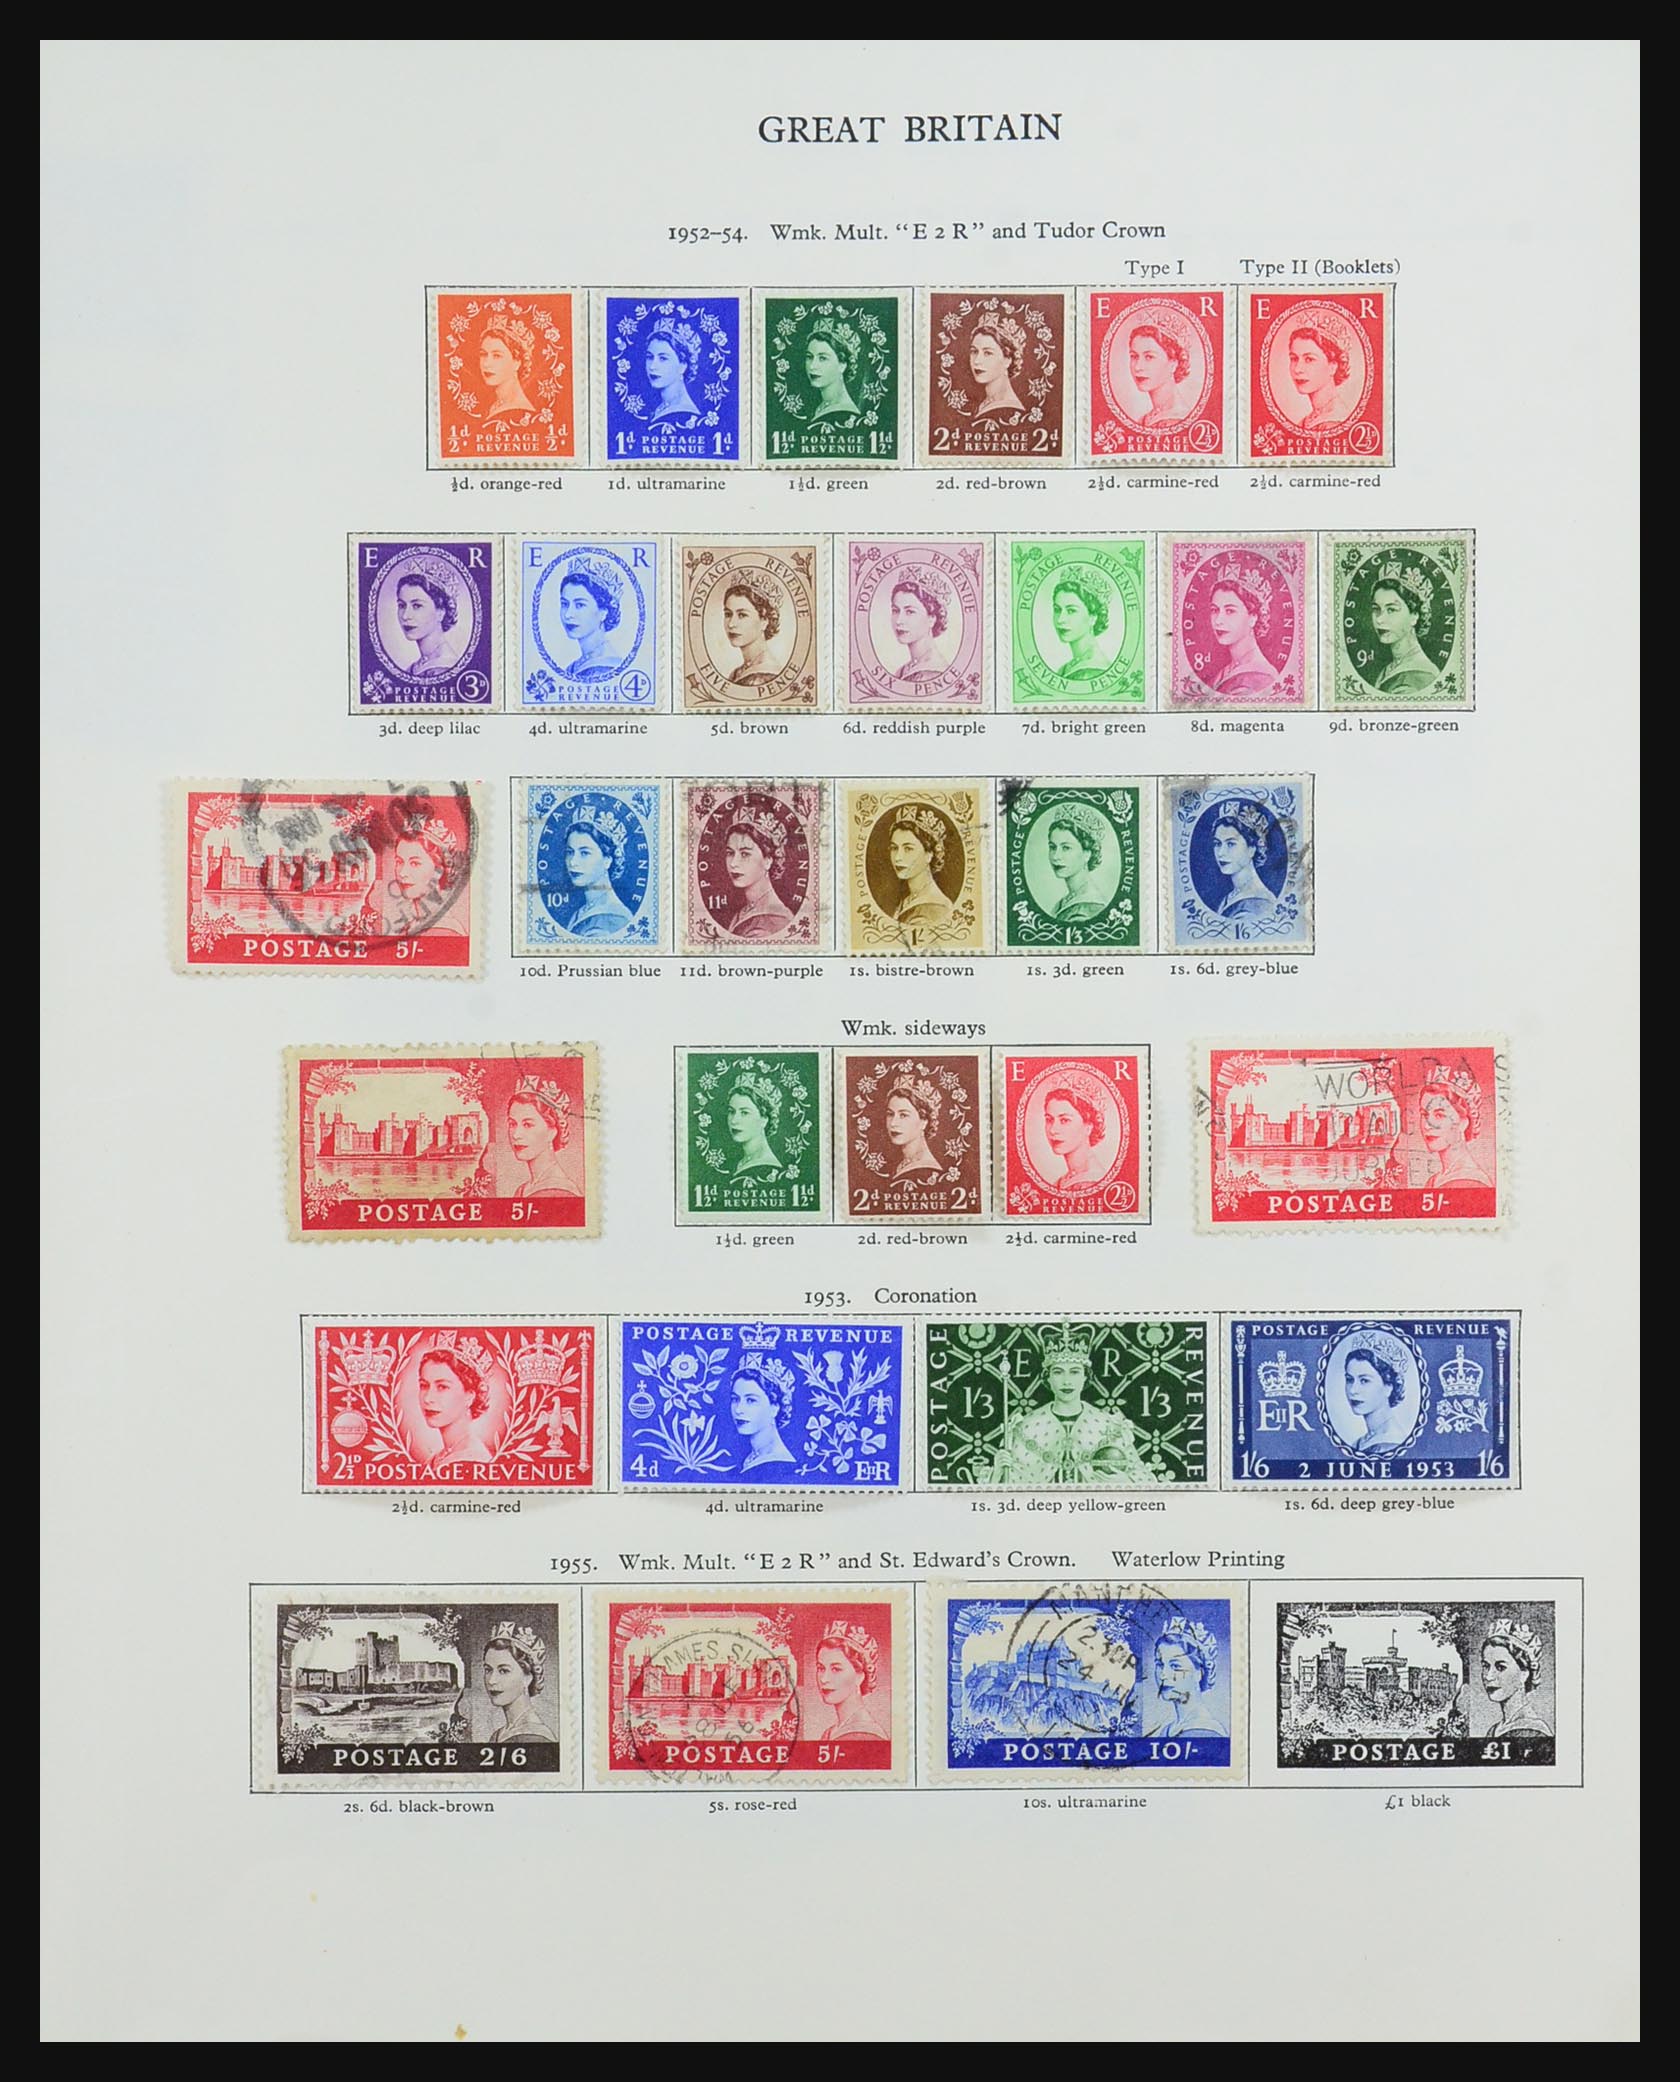 31503 001 - 31503 Great Britain and Commonwealth 1953-1971.